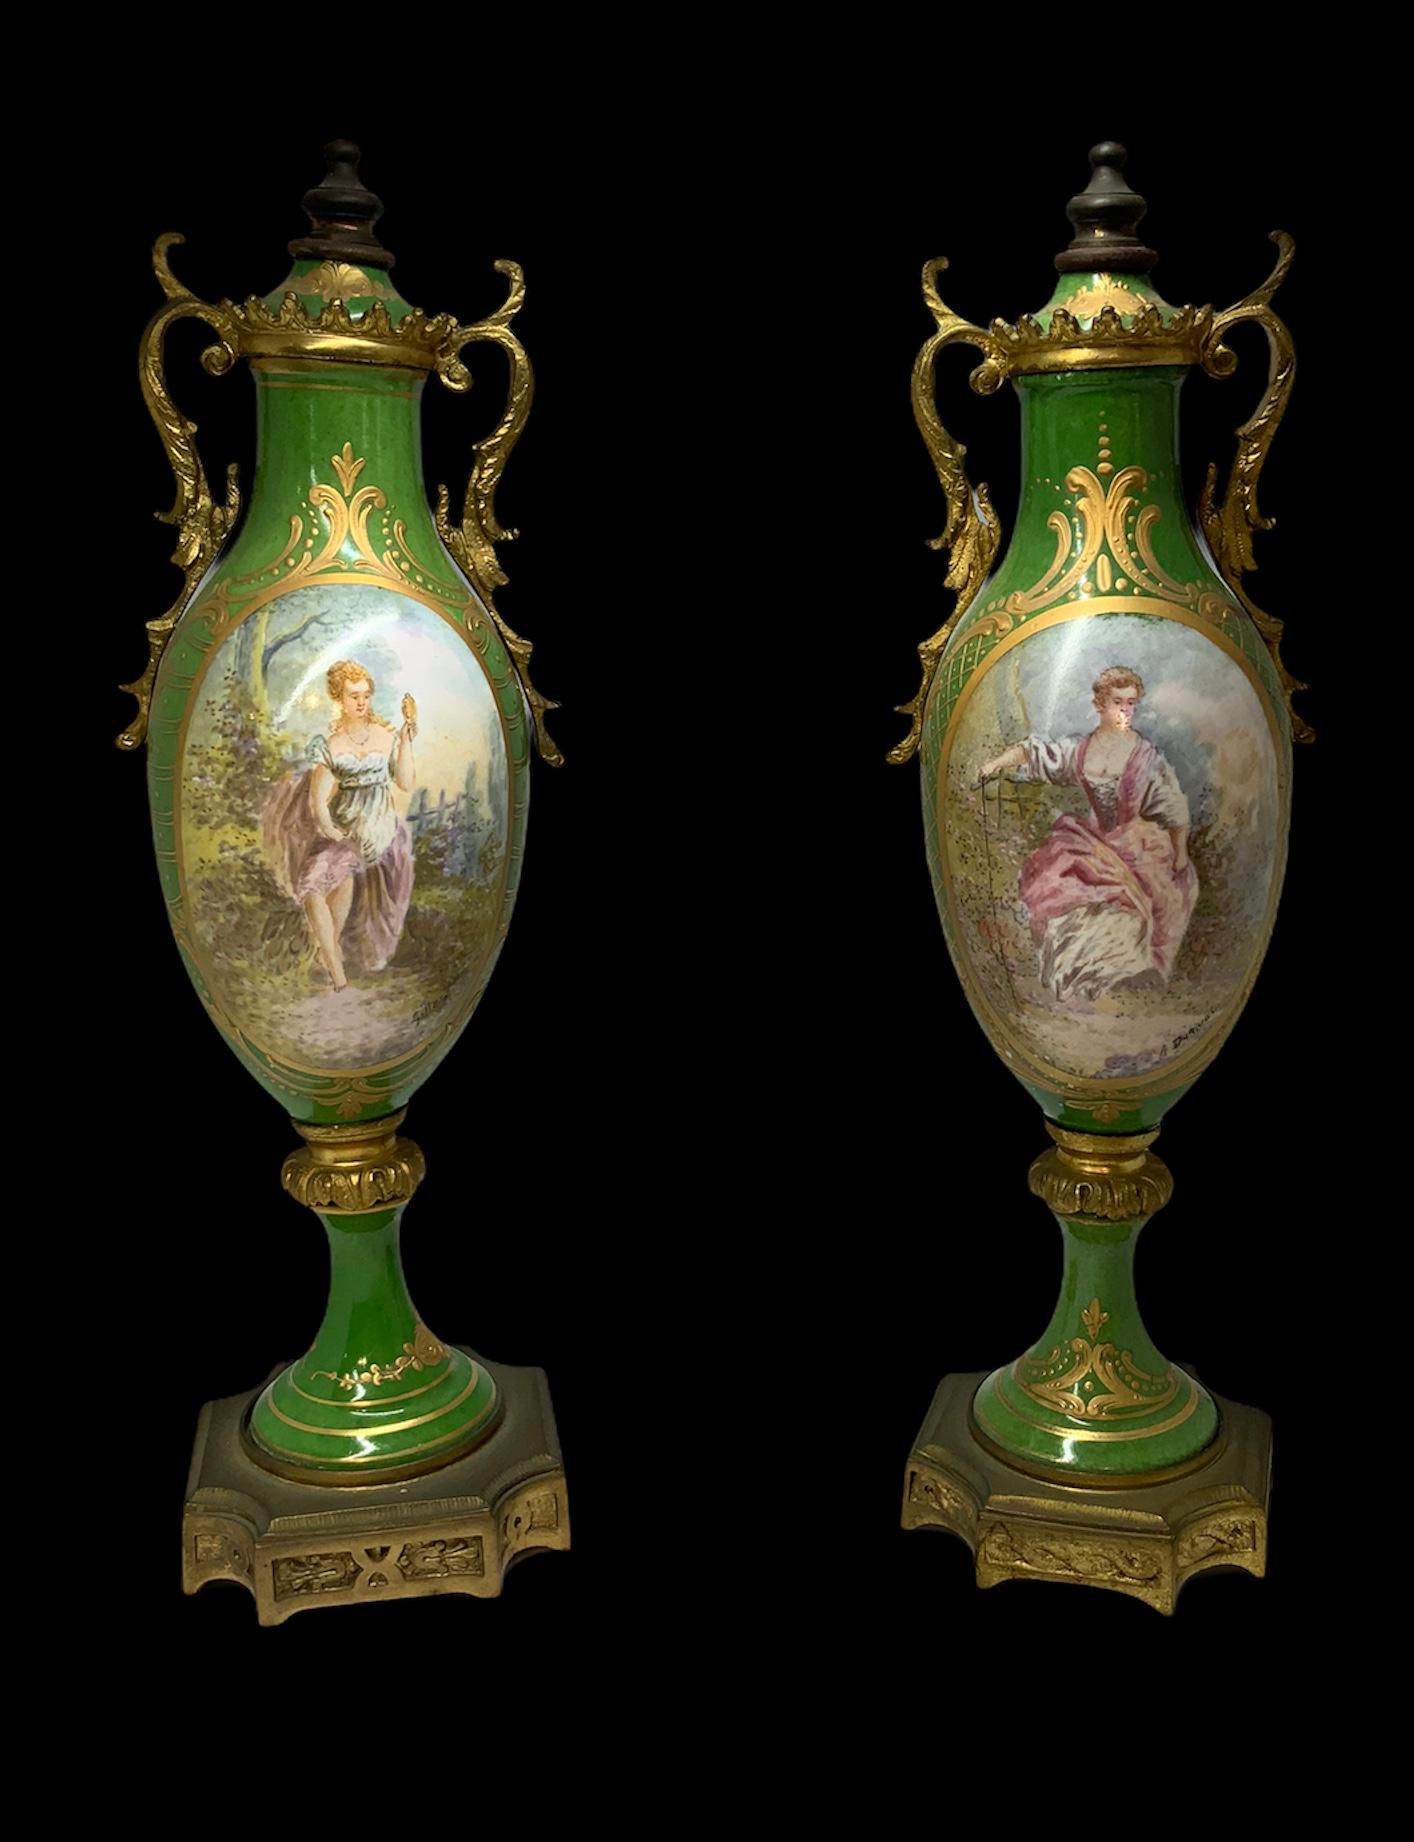 These are a pair of ormolu and green hand-painted and signed lidded urn vases. Each one depicting a scene of young ladies. One is sitting in a shore of a lake and looking at herself with a hand mirror and the other one is sitting on a stone bench in